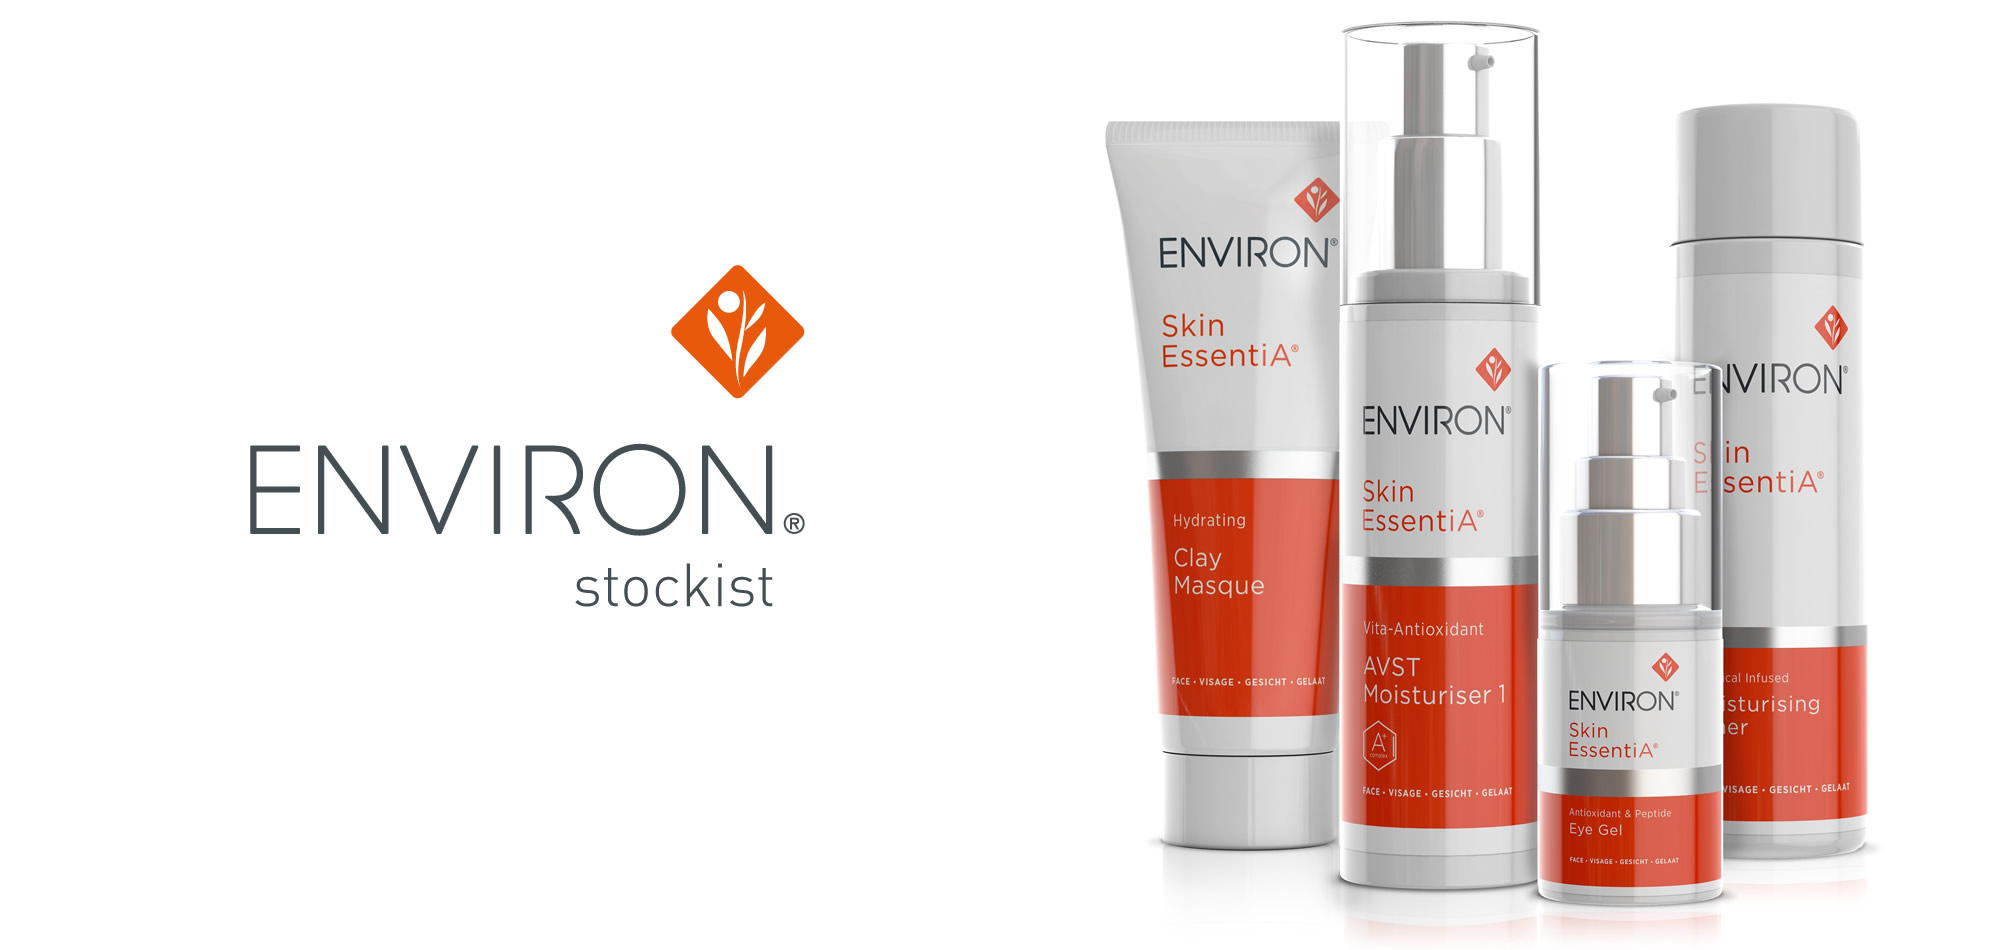 Environ, the skin care choice of Nutritional Therapists